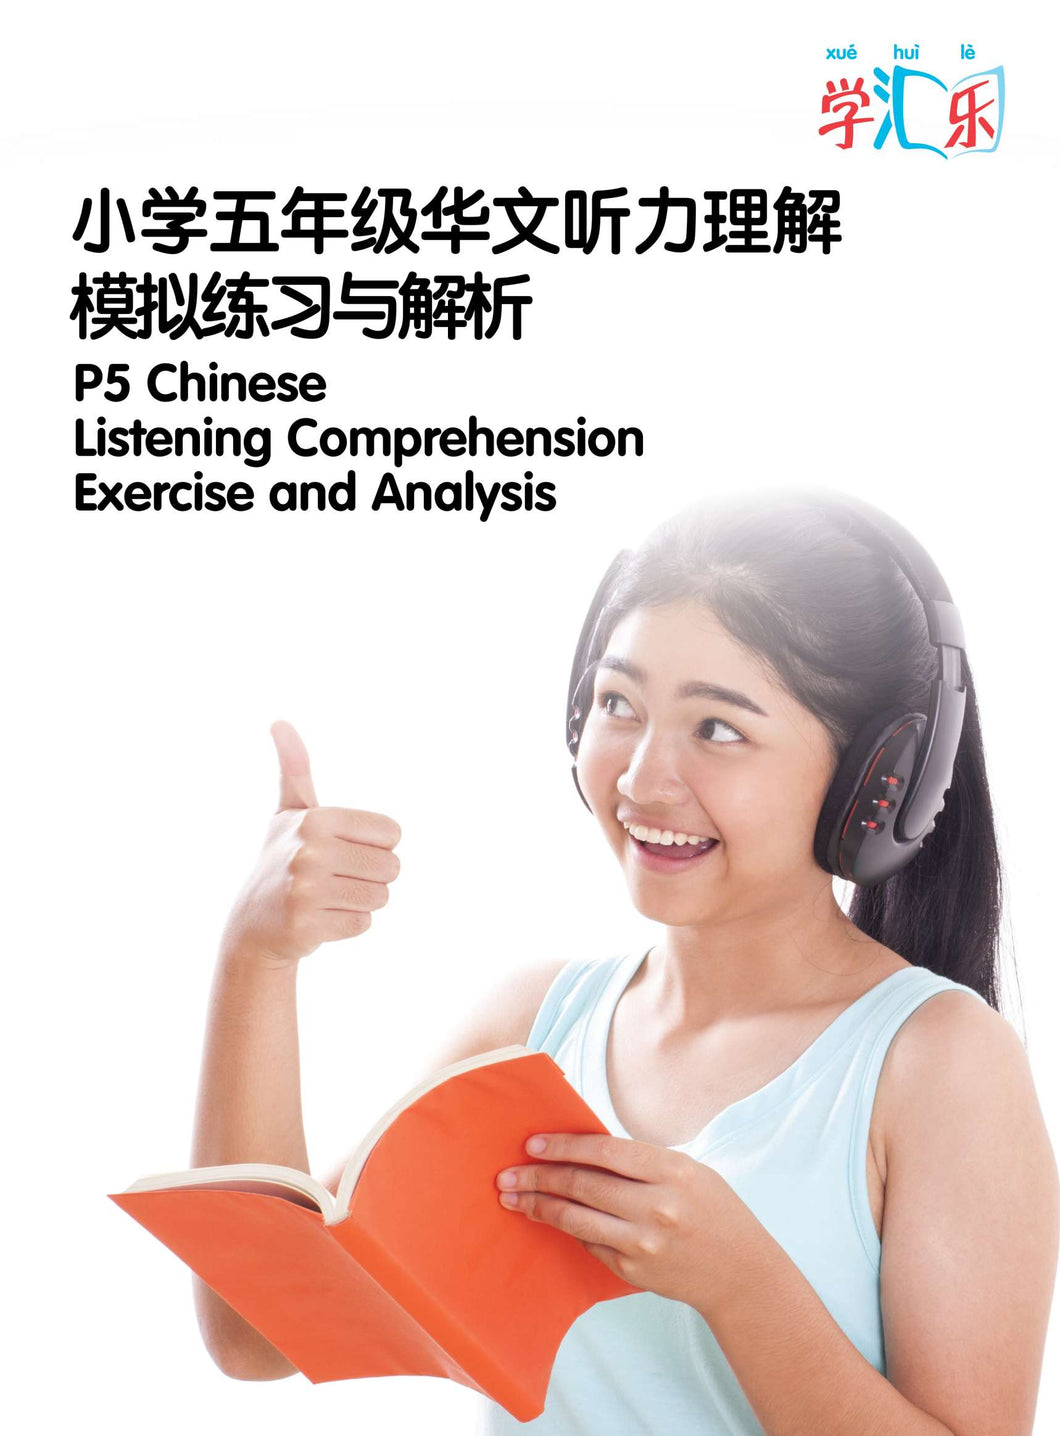 P5 Chinese Listening Comprehension Exercise and Analysis